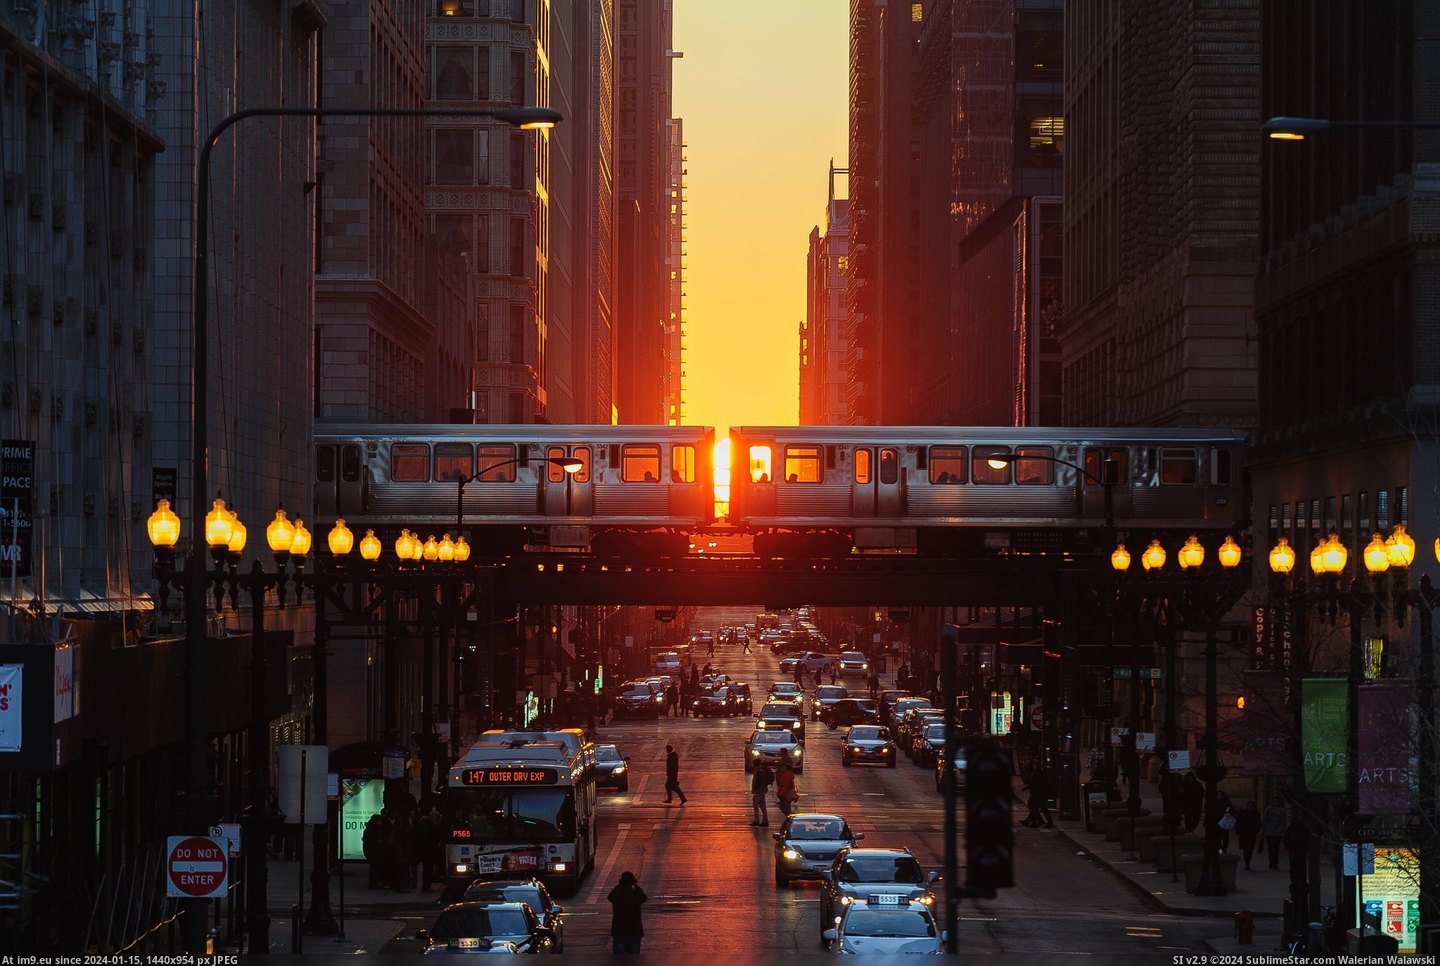 #Wallpaper #Wide #Wallpapers #Sun #Streets #Setting #Equinox #Visible #Architecture #Spring #Highres #Chicago [Pics] The setting sun is visible down the streets of Chicago during the spring equinox Pic. (Изображение из альбом My r/PICS favs))